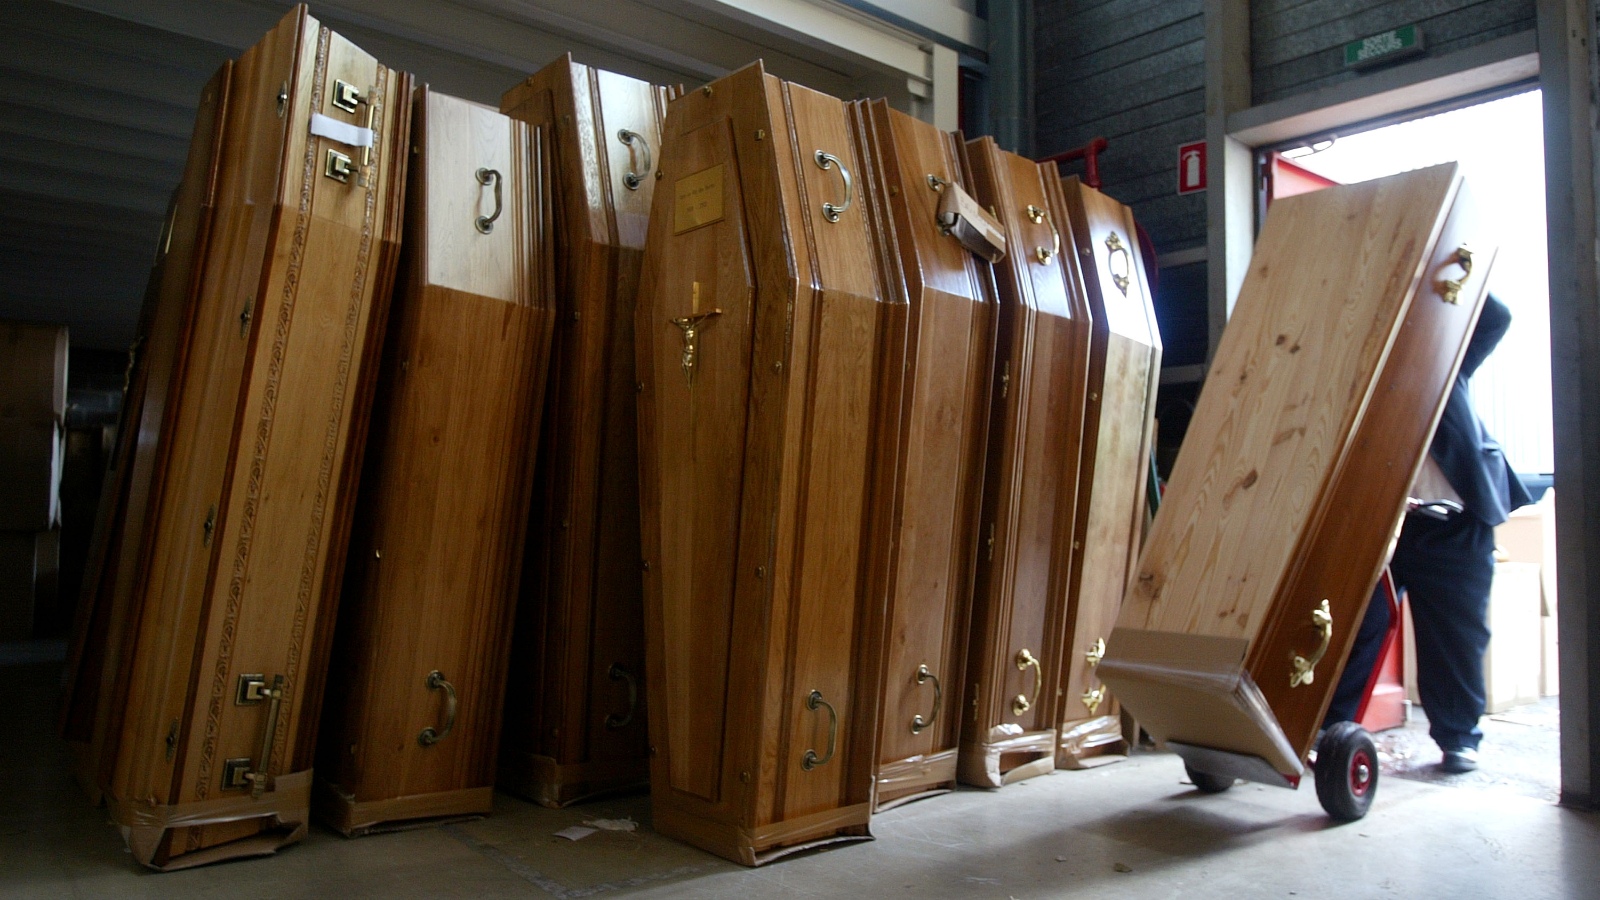 A man wearing a suit wheels a large brown wooden coffin into a room where similar-looking light-wooden coffins are stacked vertically.